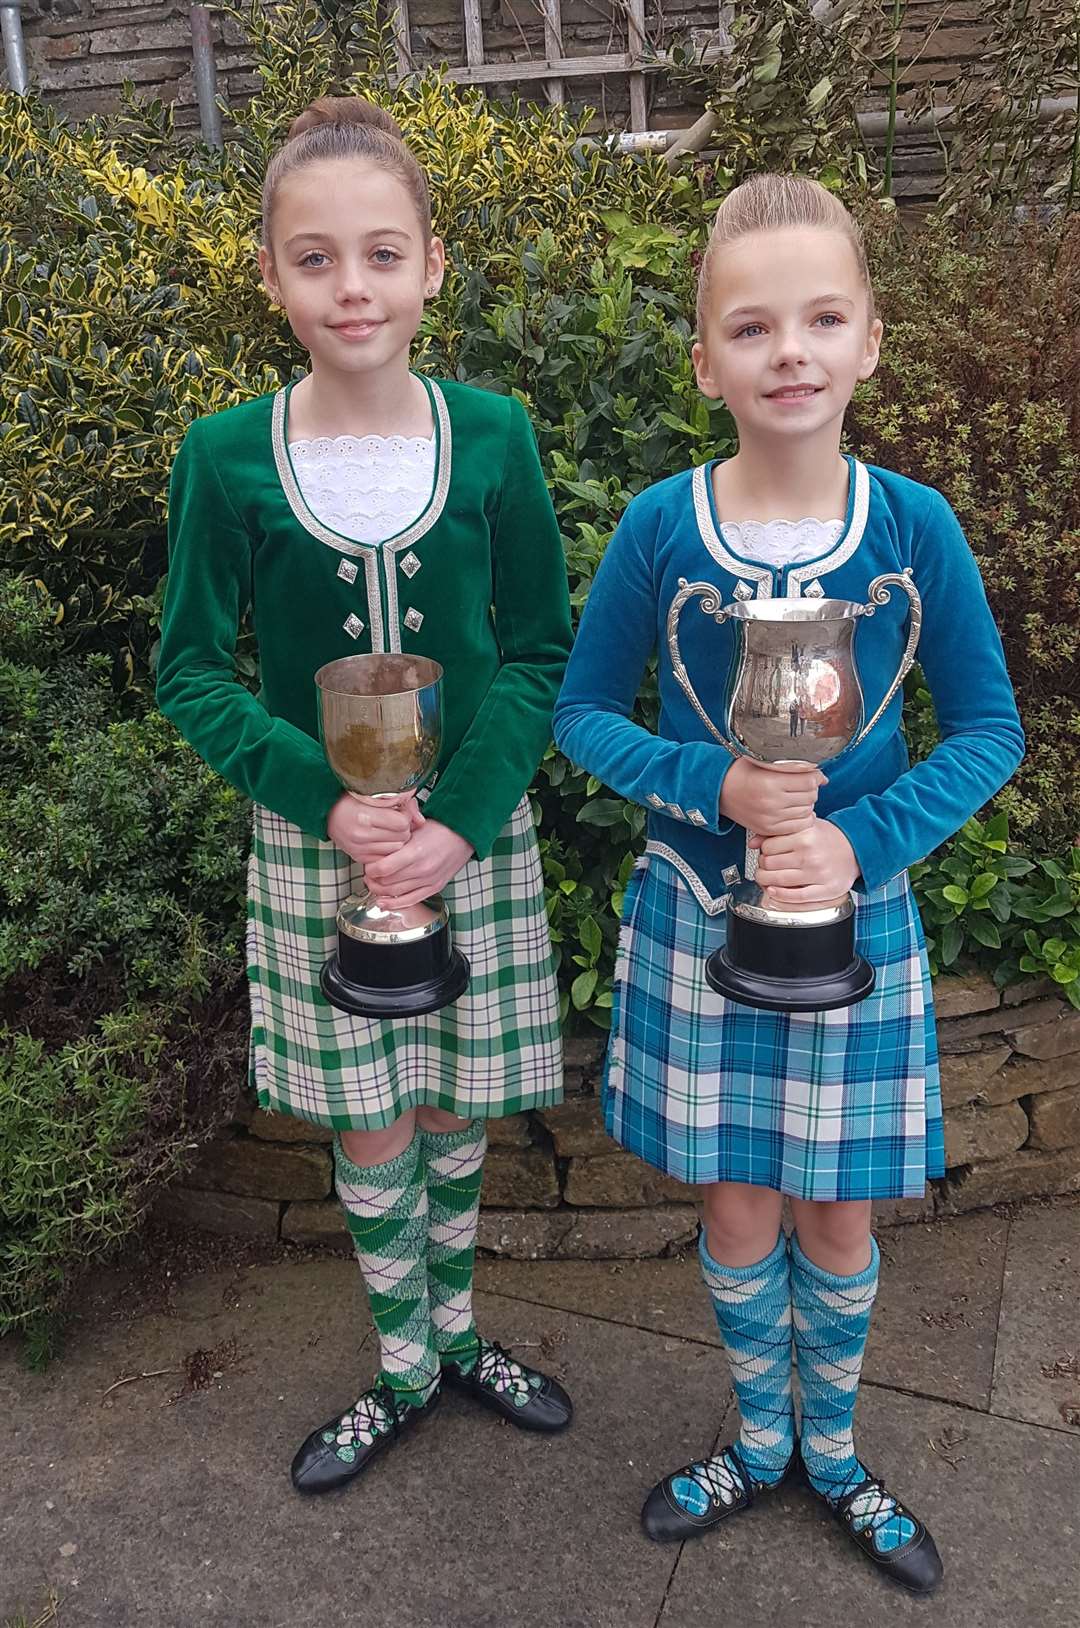 Pre-championship winners Abby Swanson (left) and Carly Harrold, pupils of the Elise Lyall School of Dance.